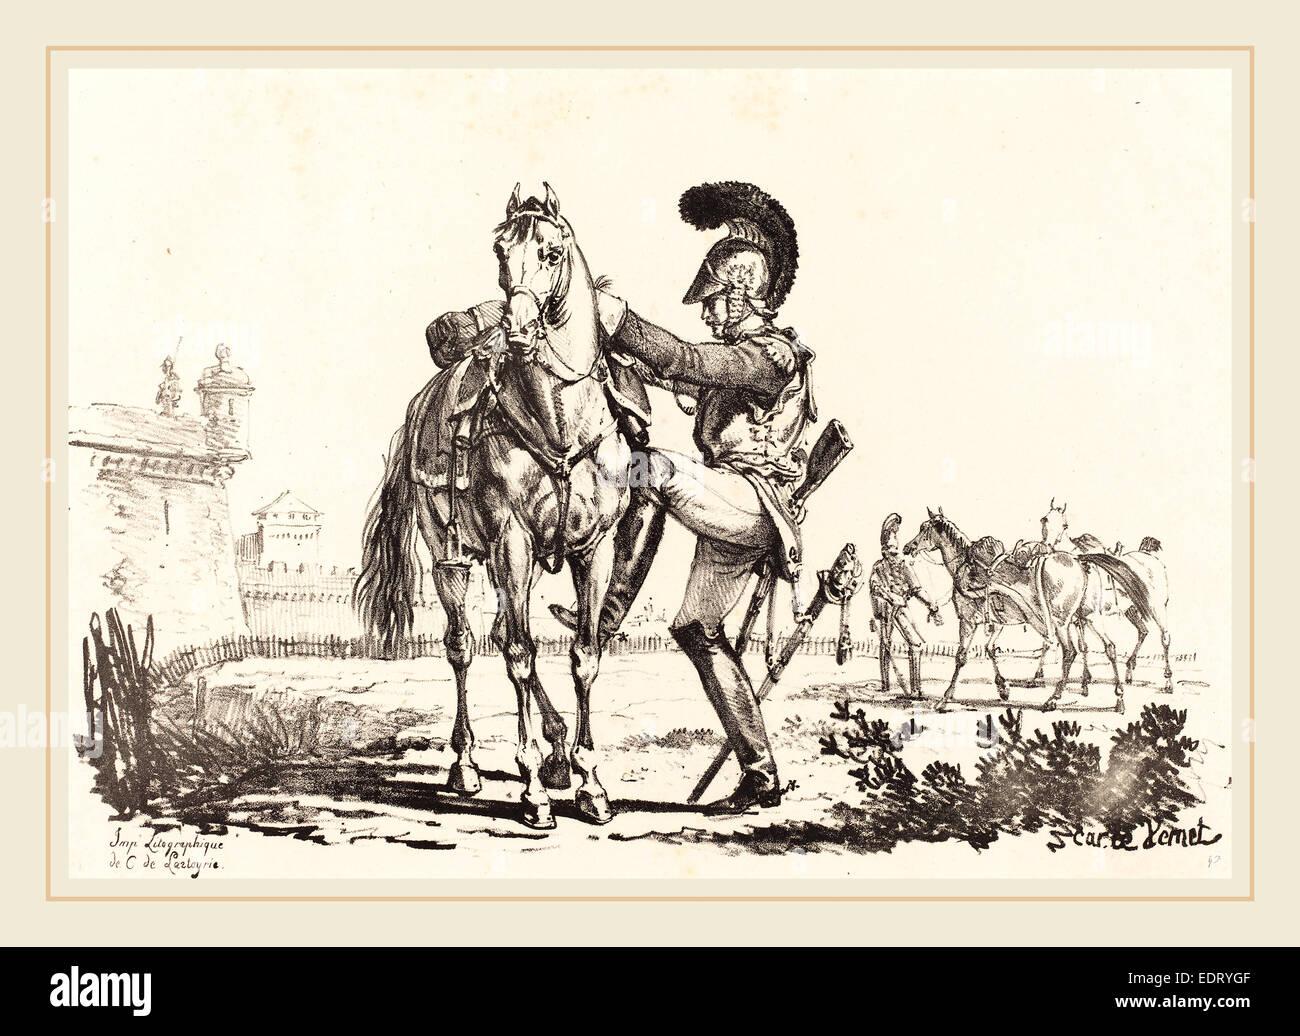 Carle Vernet (French, 1758-1836), Carabinier Mounting a Horse, lithograph Stock Photo